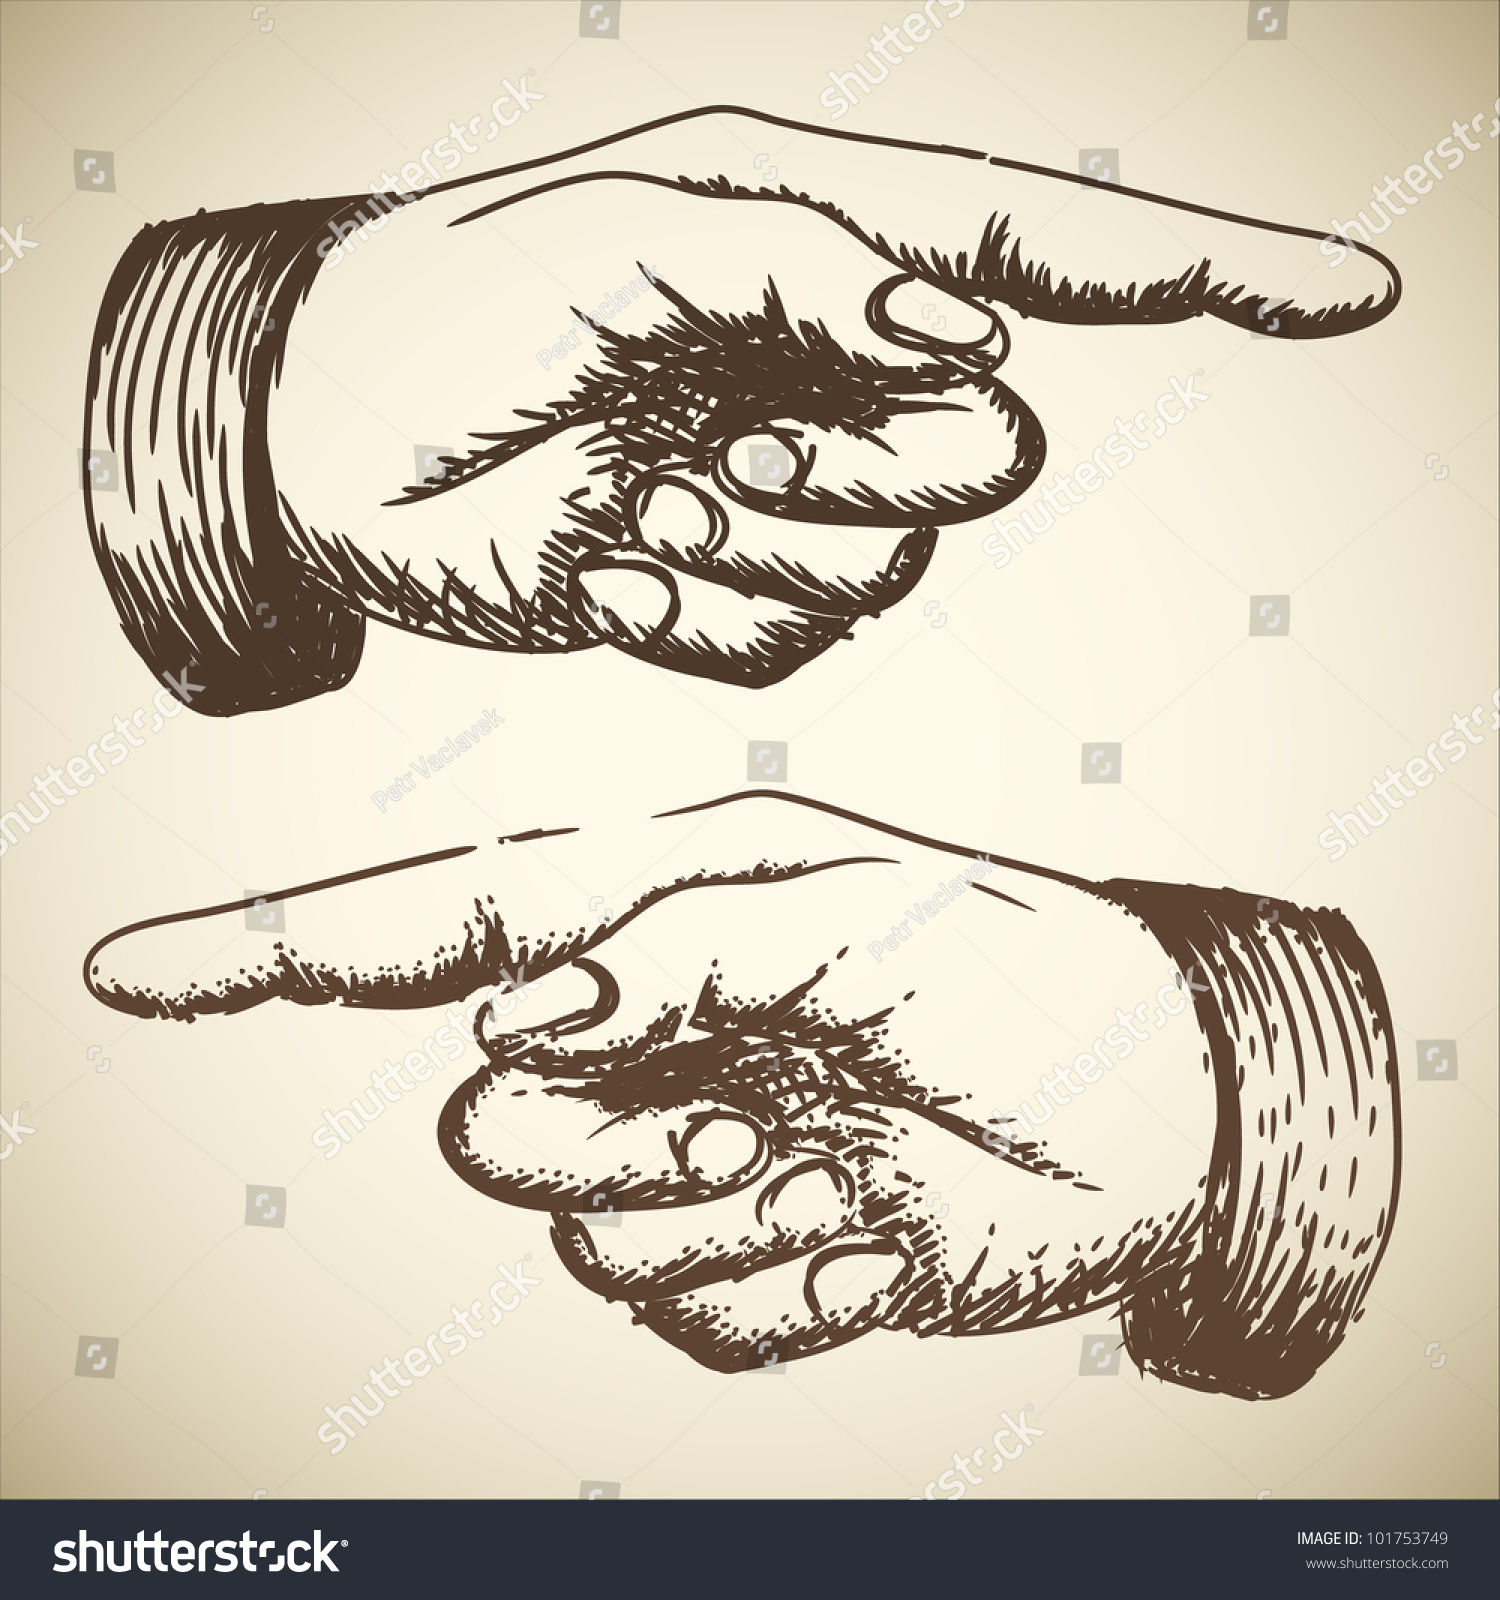 Vector Retro Vintage Pointing Hand Drawing - 101753749 : Shutterstock